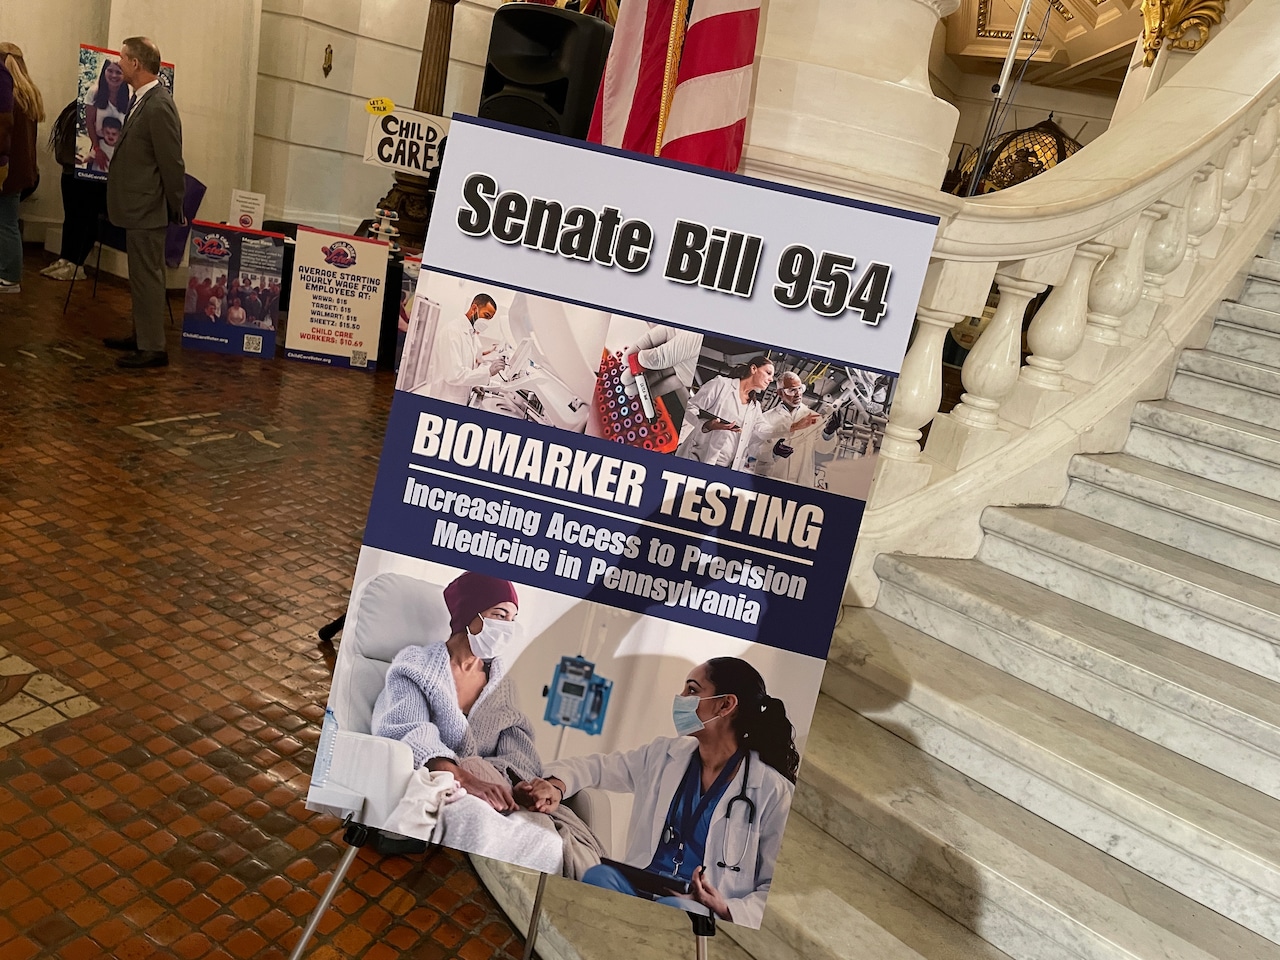 The Pennsylvania Senate must ensure patients have access to biomarker testing | Opinion [Video]